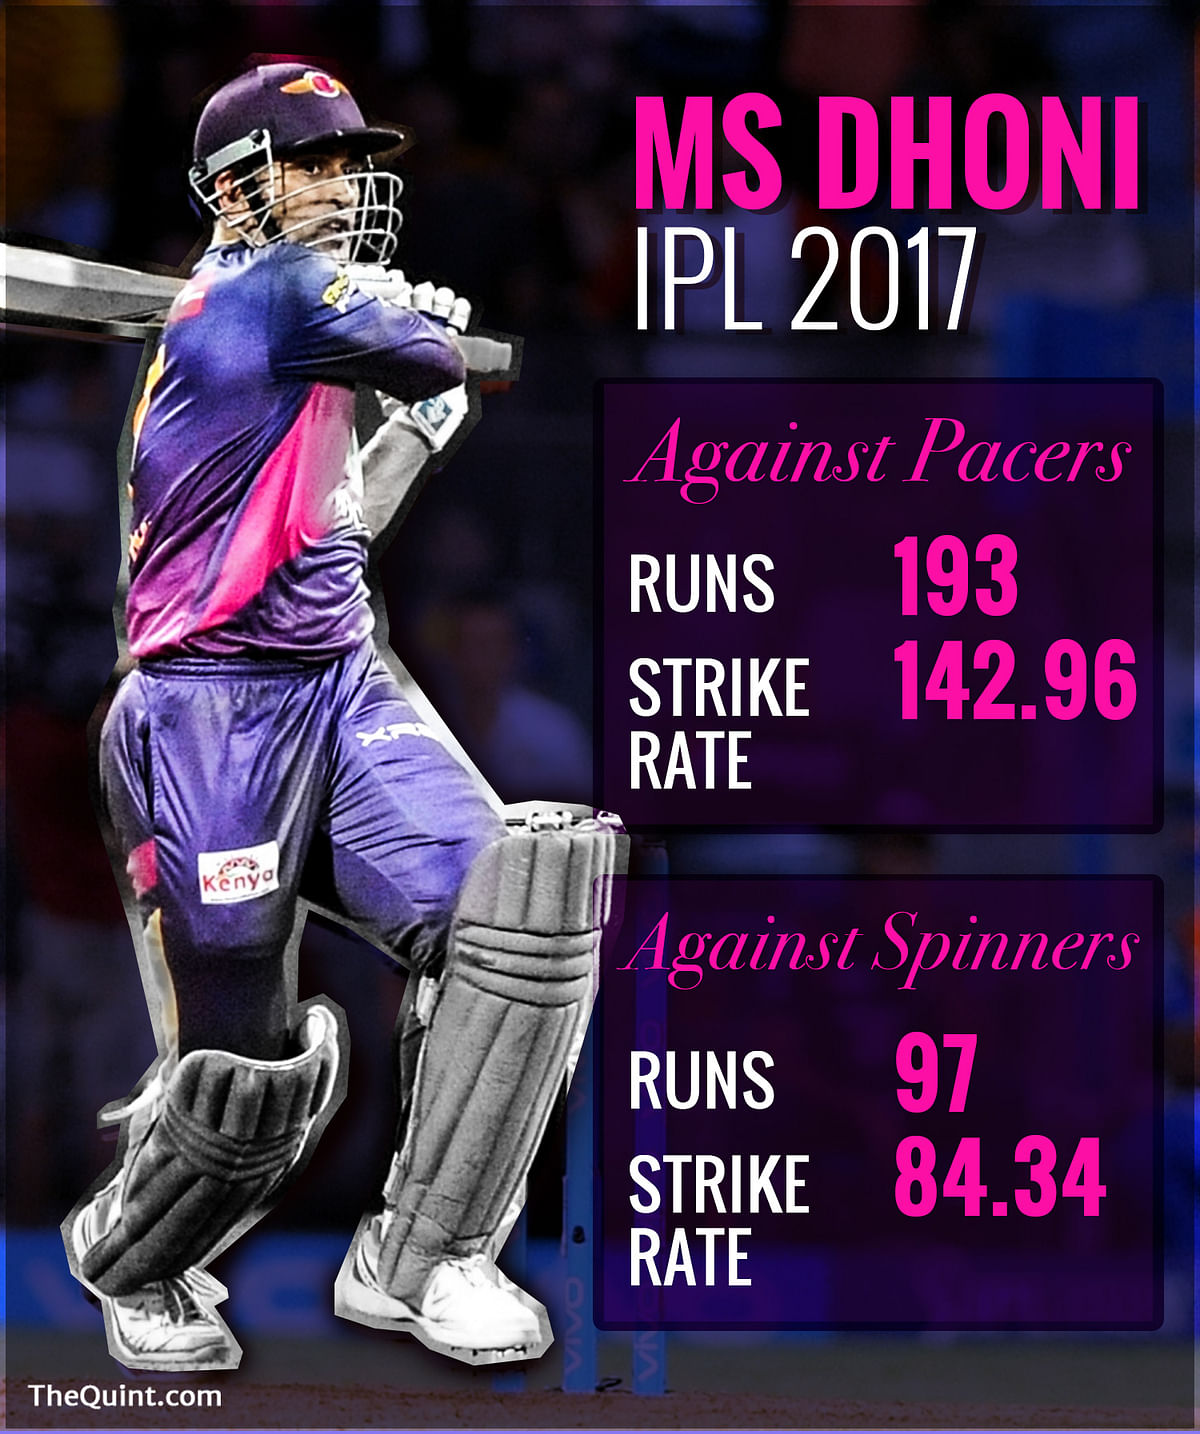 His IPL numbers may have left fans wanting but stats show MS Dhoni’s form in the 50-over format is on the rise.